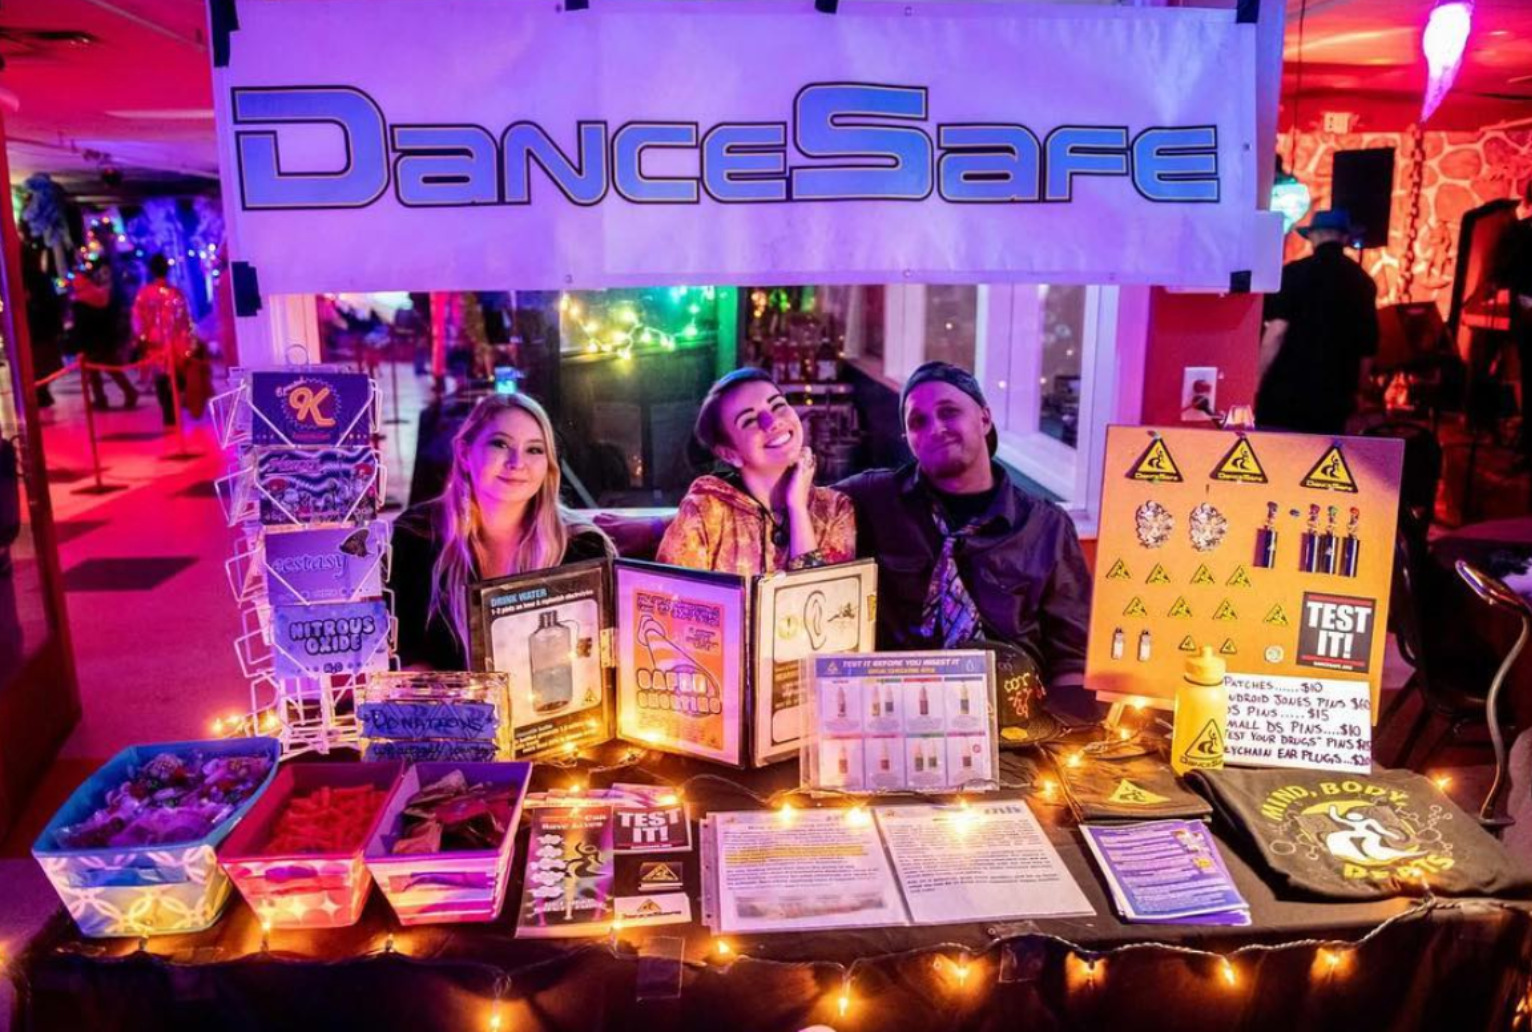 Three people sit behind a table, all with light-toned skin. The table is softly lit by warm orange lights and contains bins of condoms, earplugs, and other harm reduction supplies, neatly organized next to pamphlets and pegboards of pins and earrings. A white poster with the DanceSafe logo in blue hangs above and behind the three people, who have, from left to right, long blonde hair and a black sweater on, brown hair and an orange and red hoodie on, and a short beard and a brown jacket on. Glowing red and blue lights of a party are visible in the background.